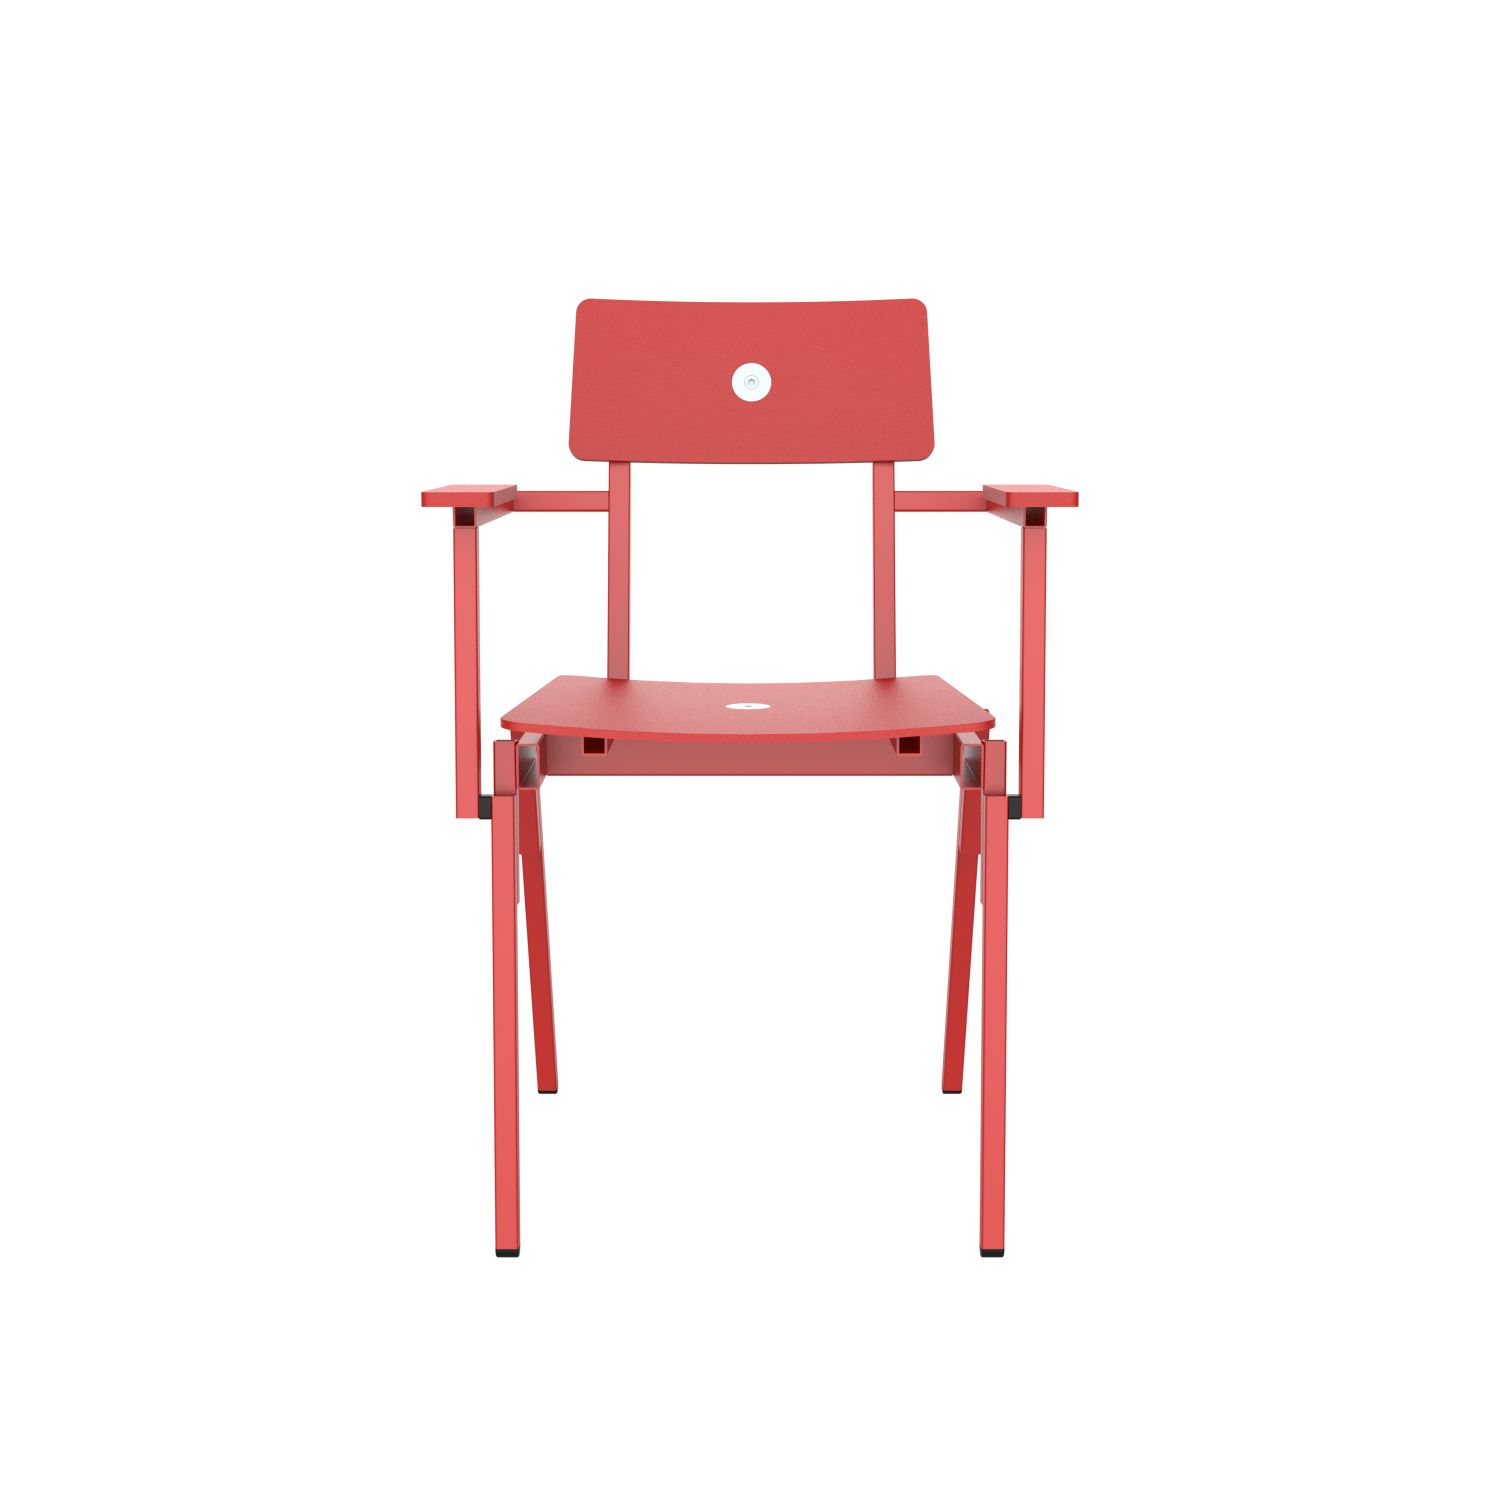 lensvelt piet hein eek mitw wooden chair with armrests traffic red ral3020 traffic red ral3020 hard leg ends